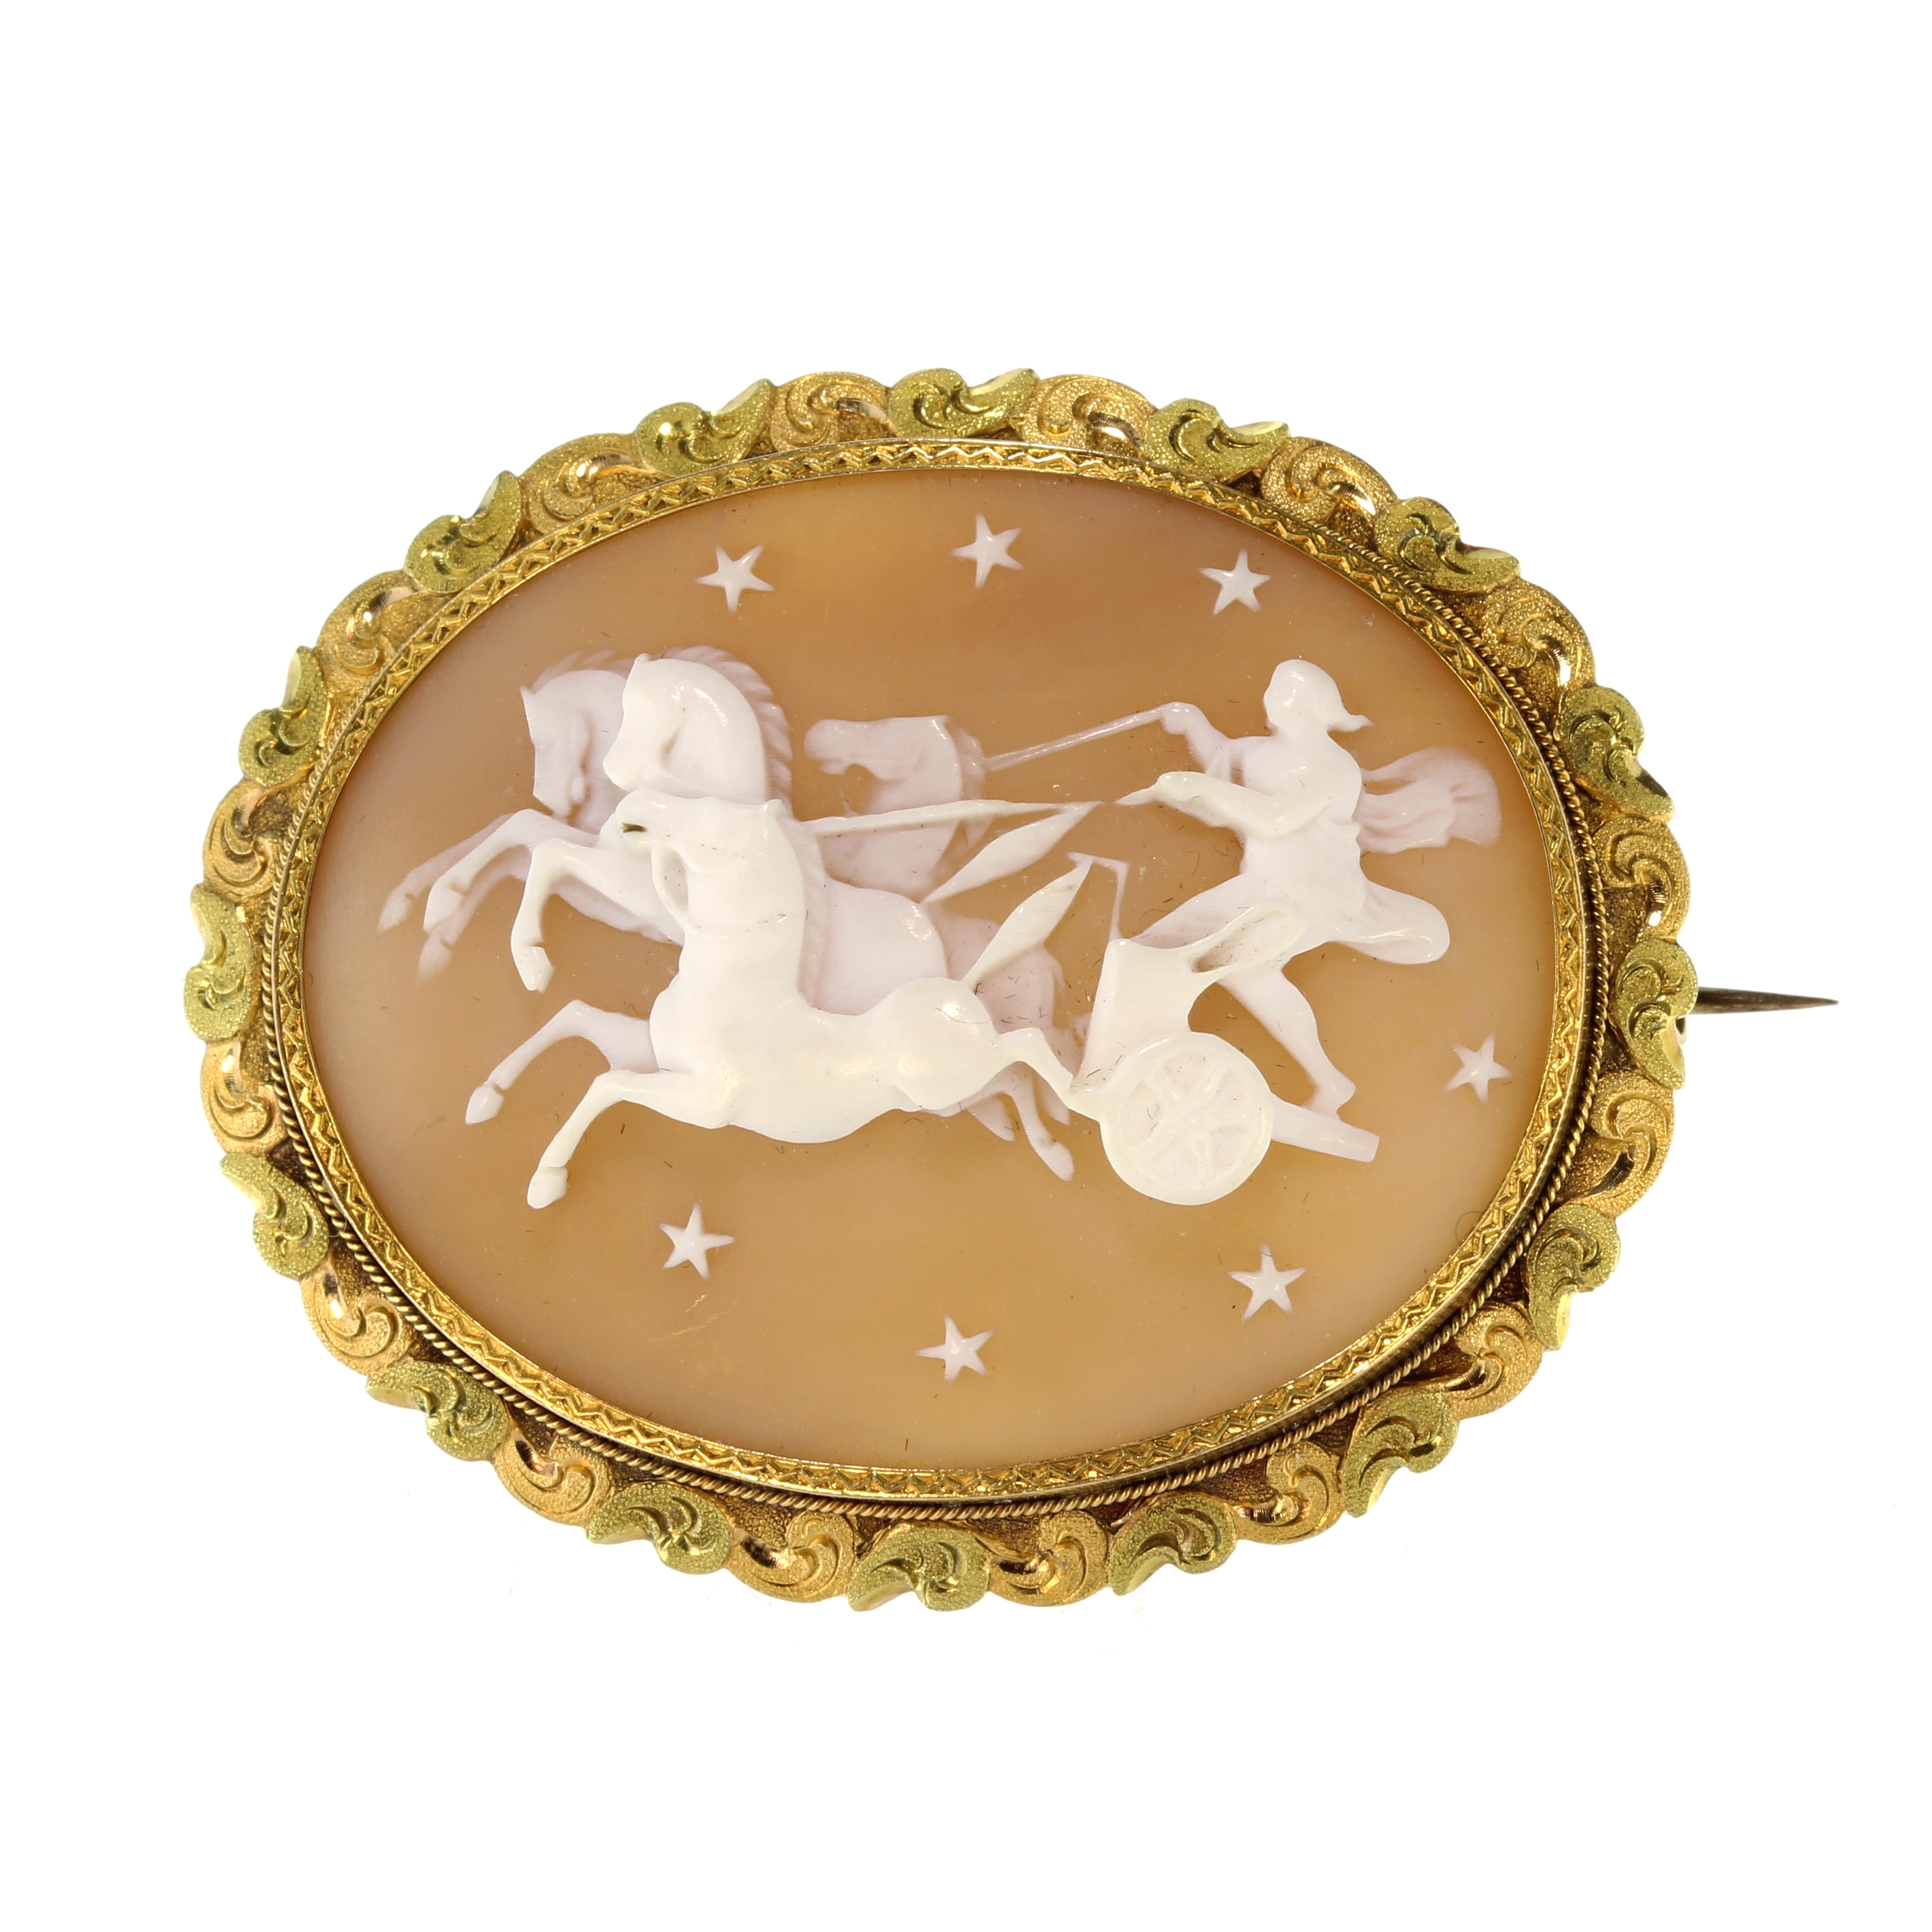 A fine antique carved cameo brooch in high carat two colour gold designed as a large oval cameo